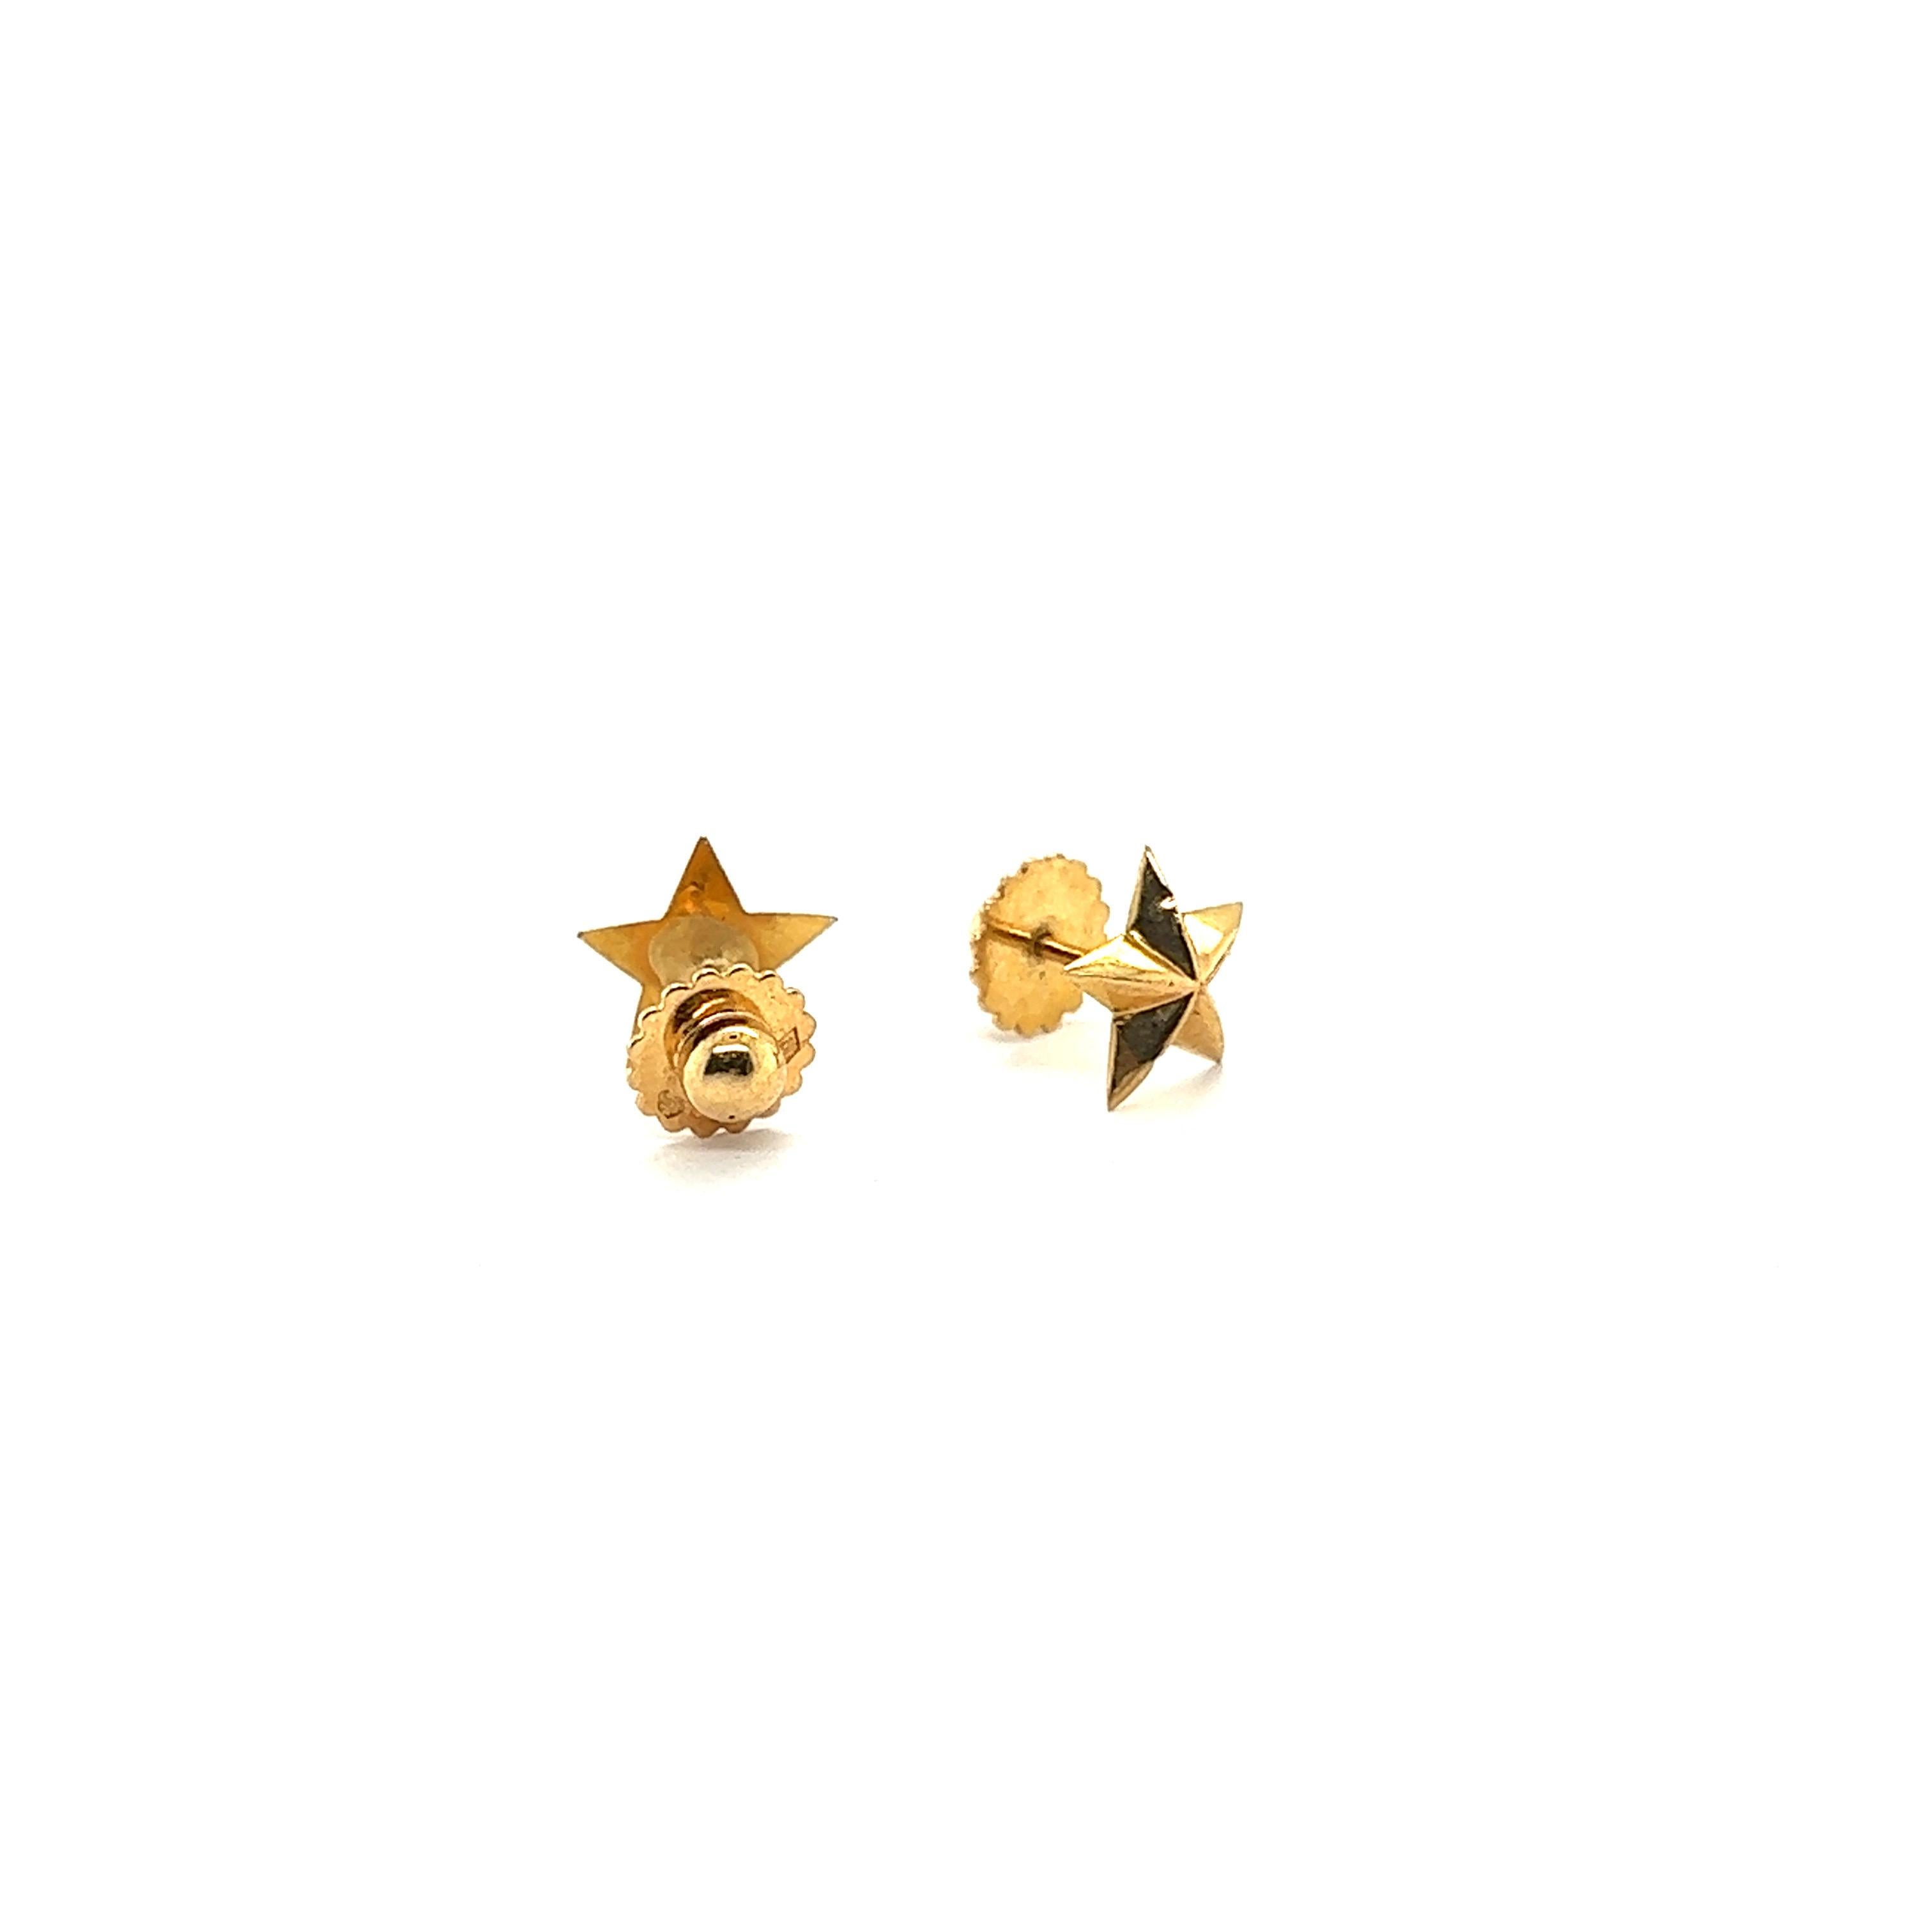 Star Shaped Earrings Yellow Gold 18 Karat 

These beautiful volume star earrings are a must-have addition to your high quality jewellery collection. The earrings feature screw-on buttons to ensure maximum security and a perfect fit. They are